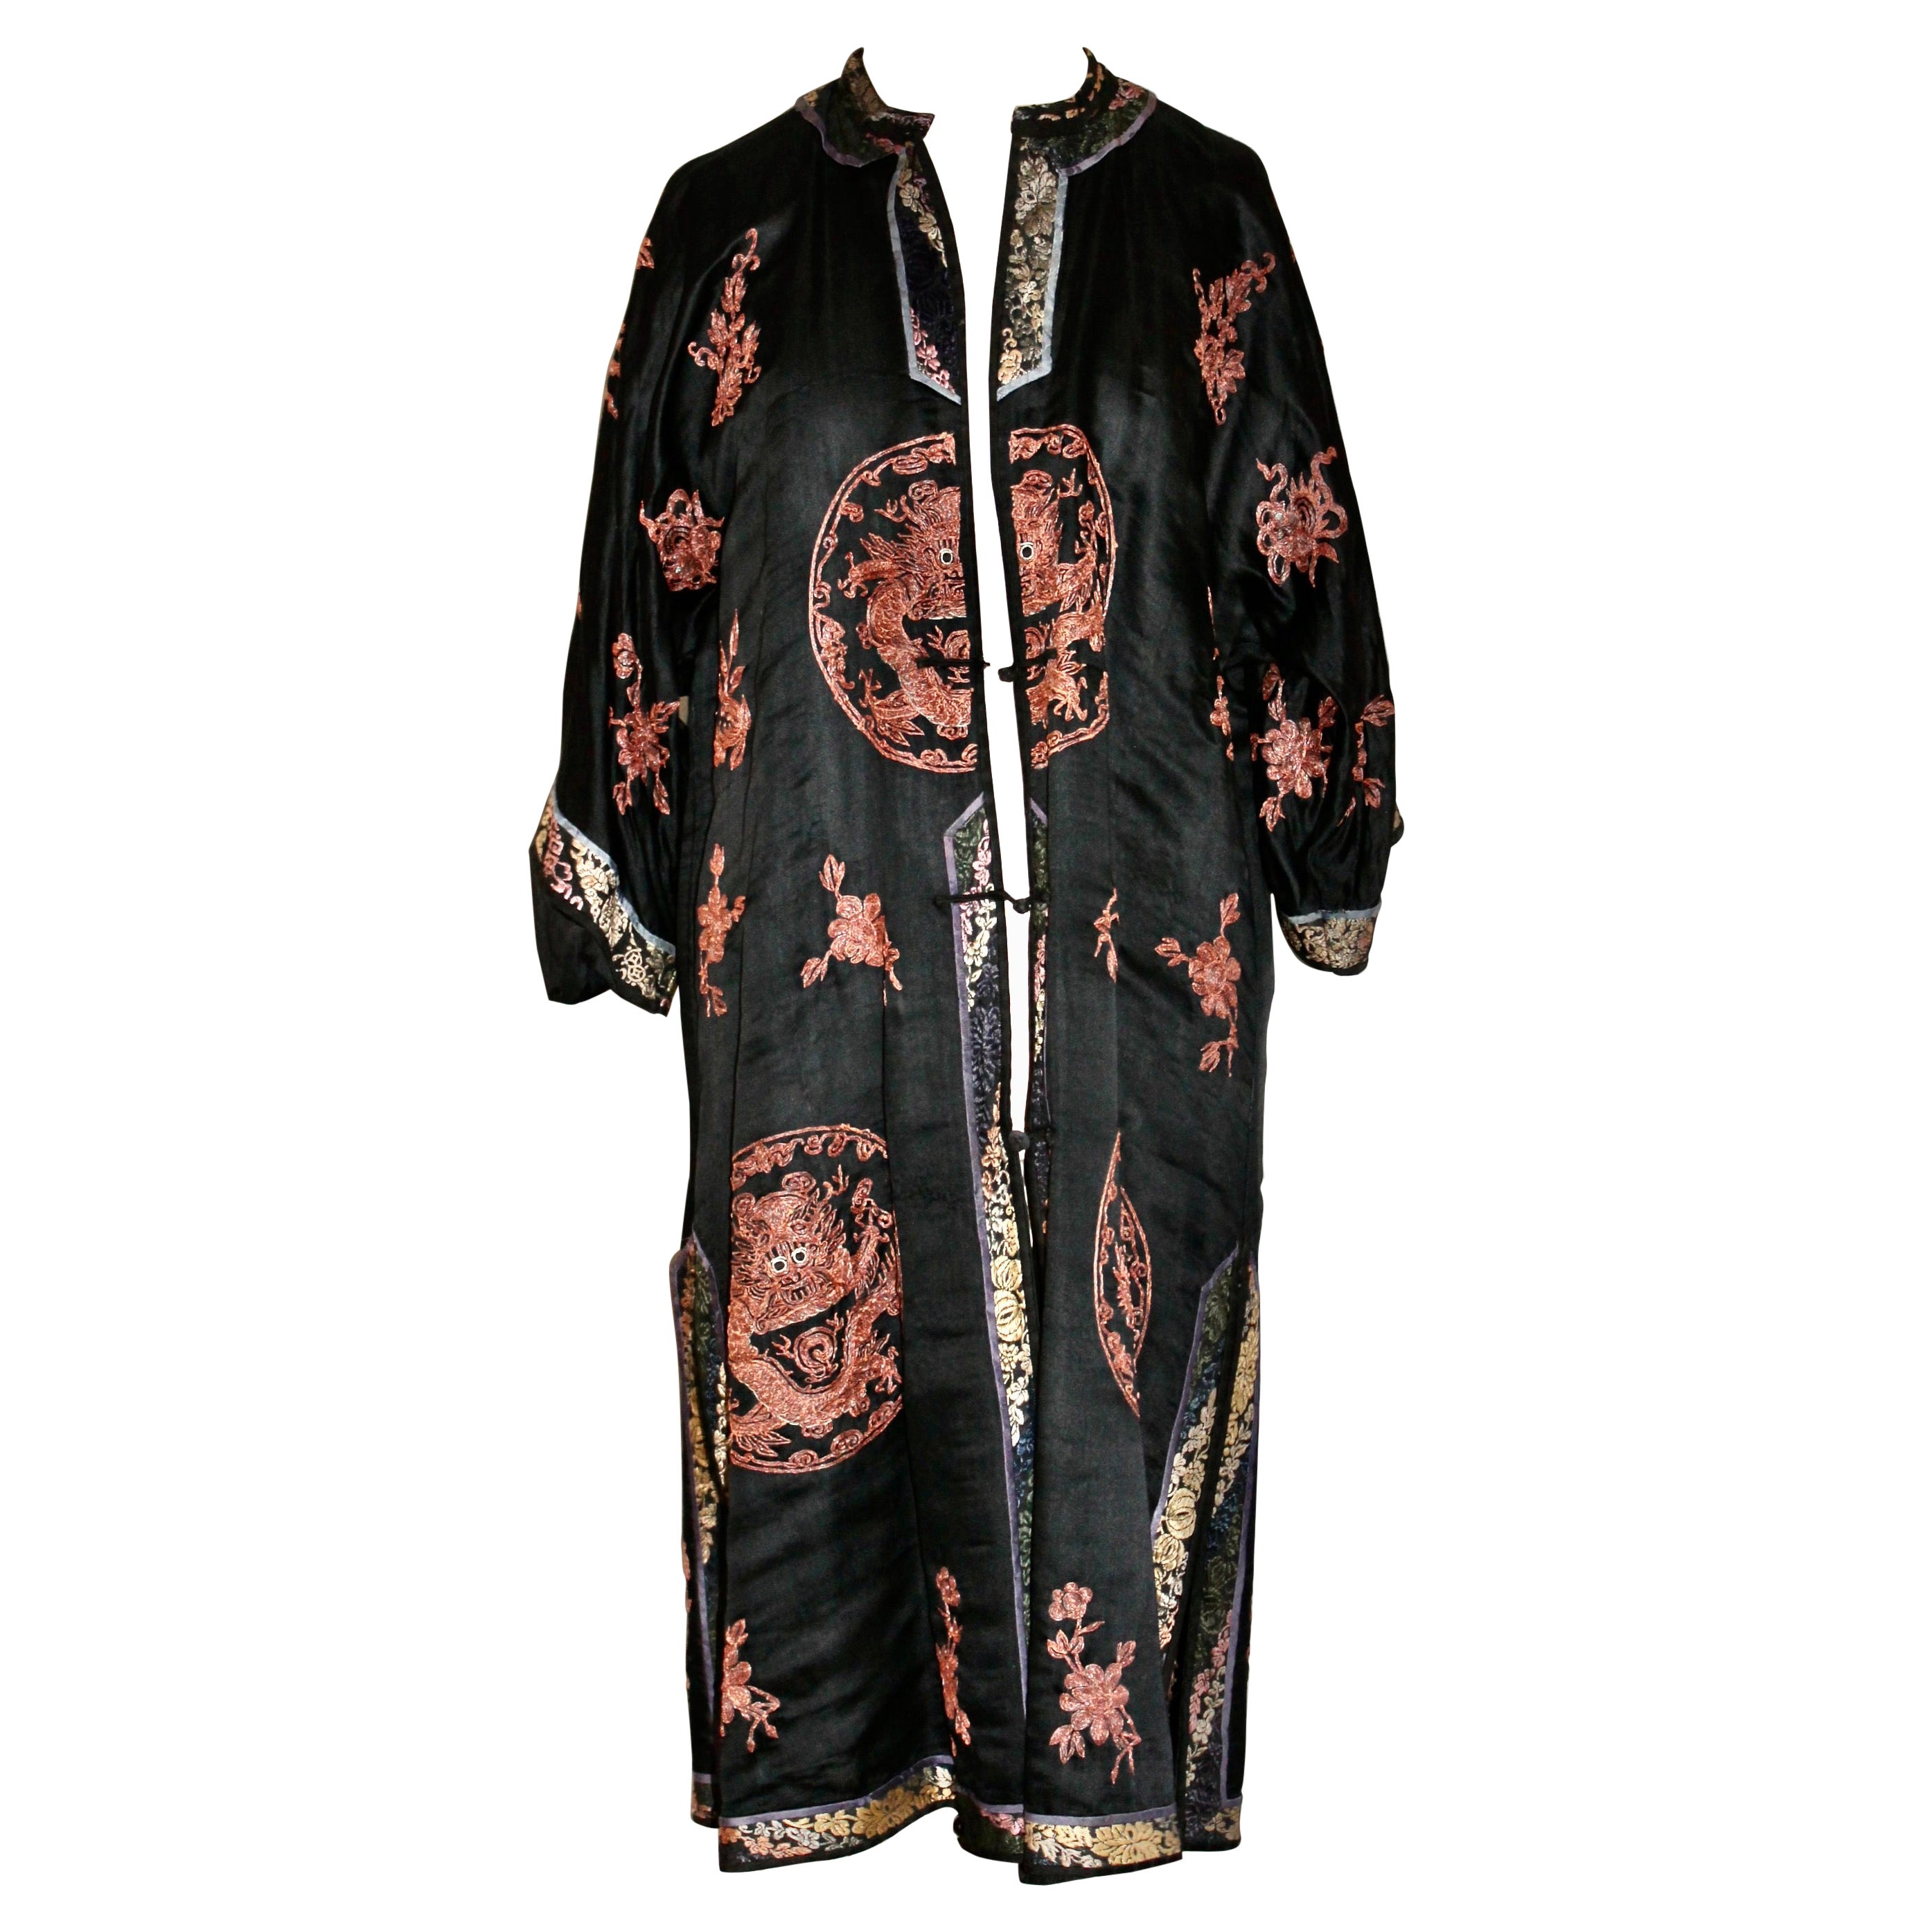 Early 20th Century Chinese Robe with Metallic Dragon Embroidery